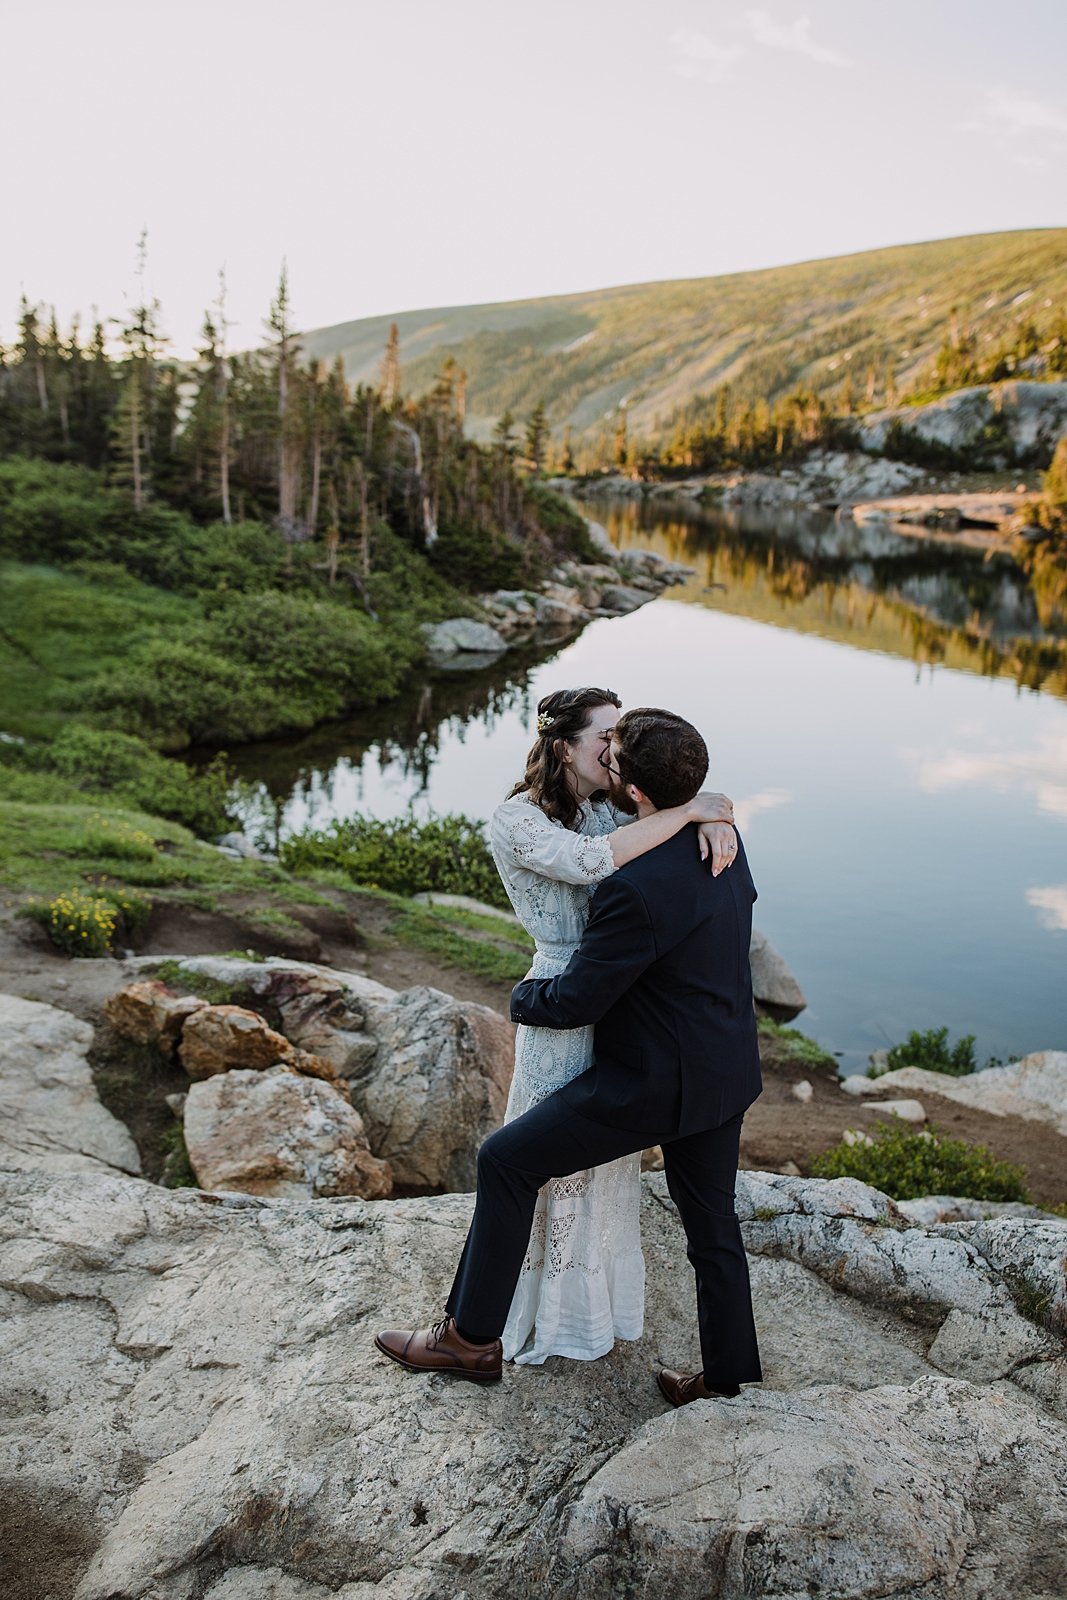 groom dipping bride for a kiss, reflection of pine trees on alpine lake, mitchell lake elopement, early morning elopement, antique bride and groom wedding attire, elopement hairstyle